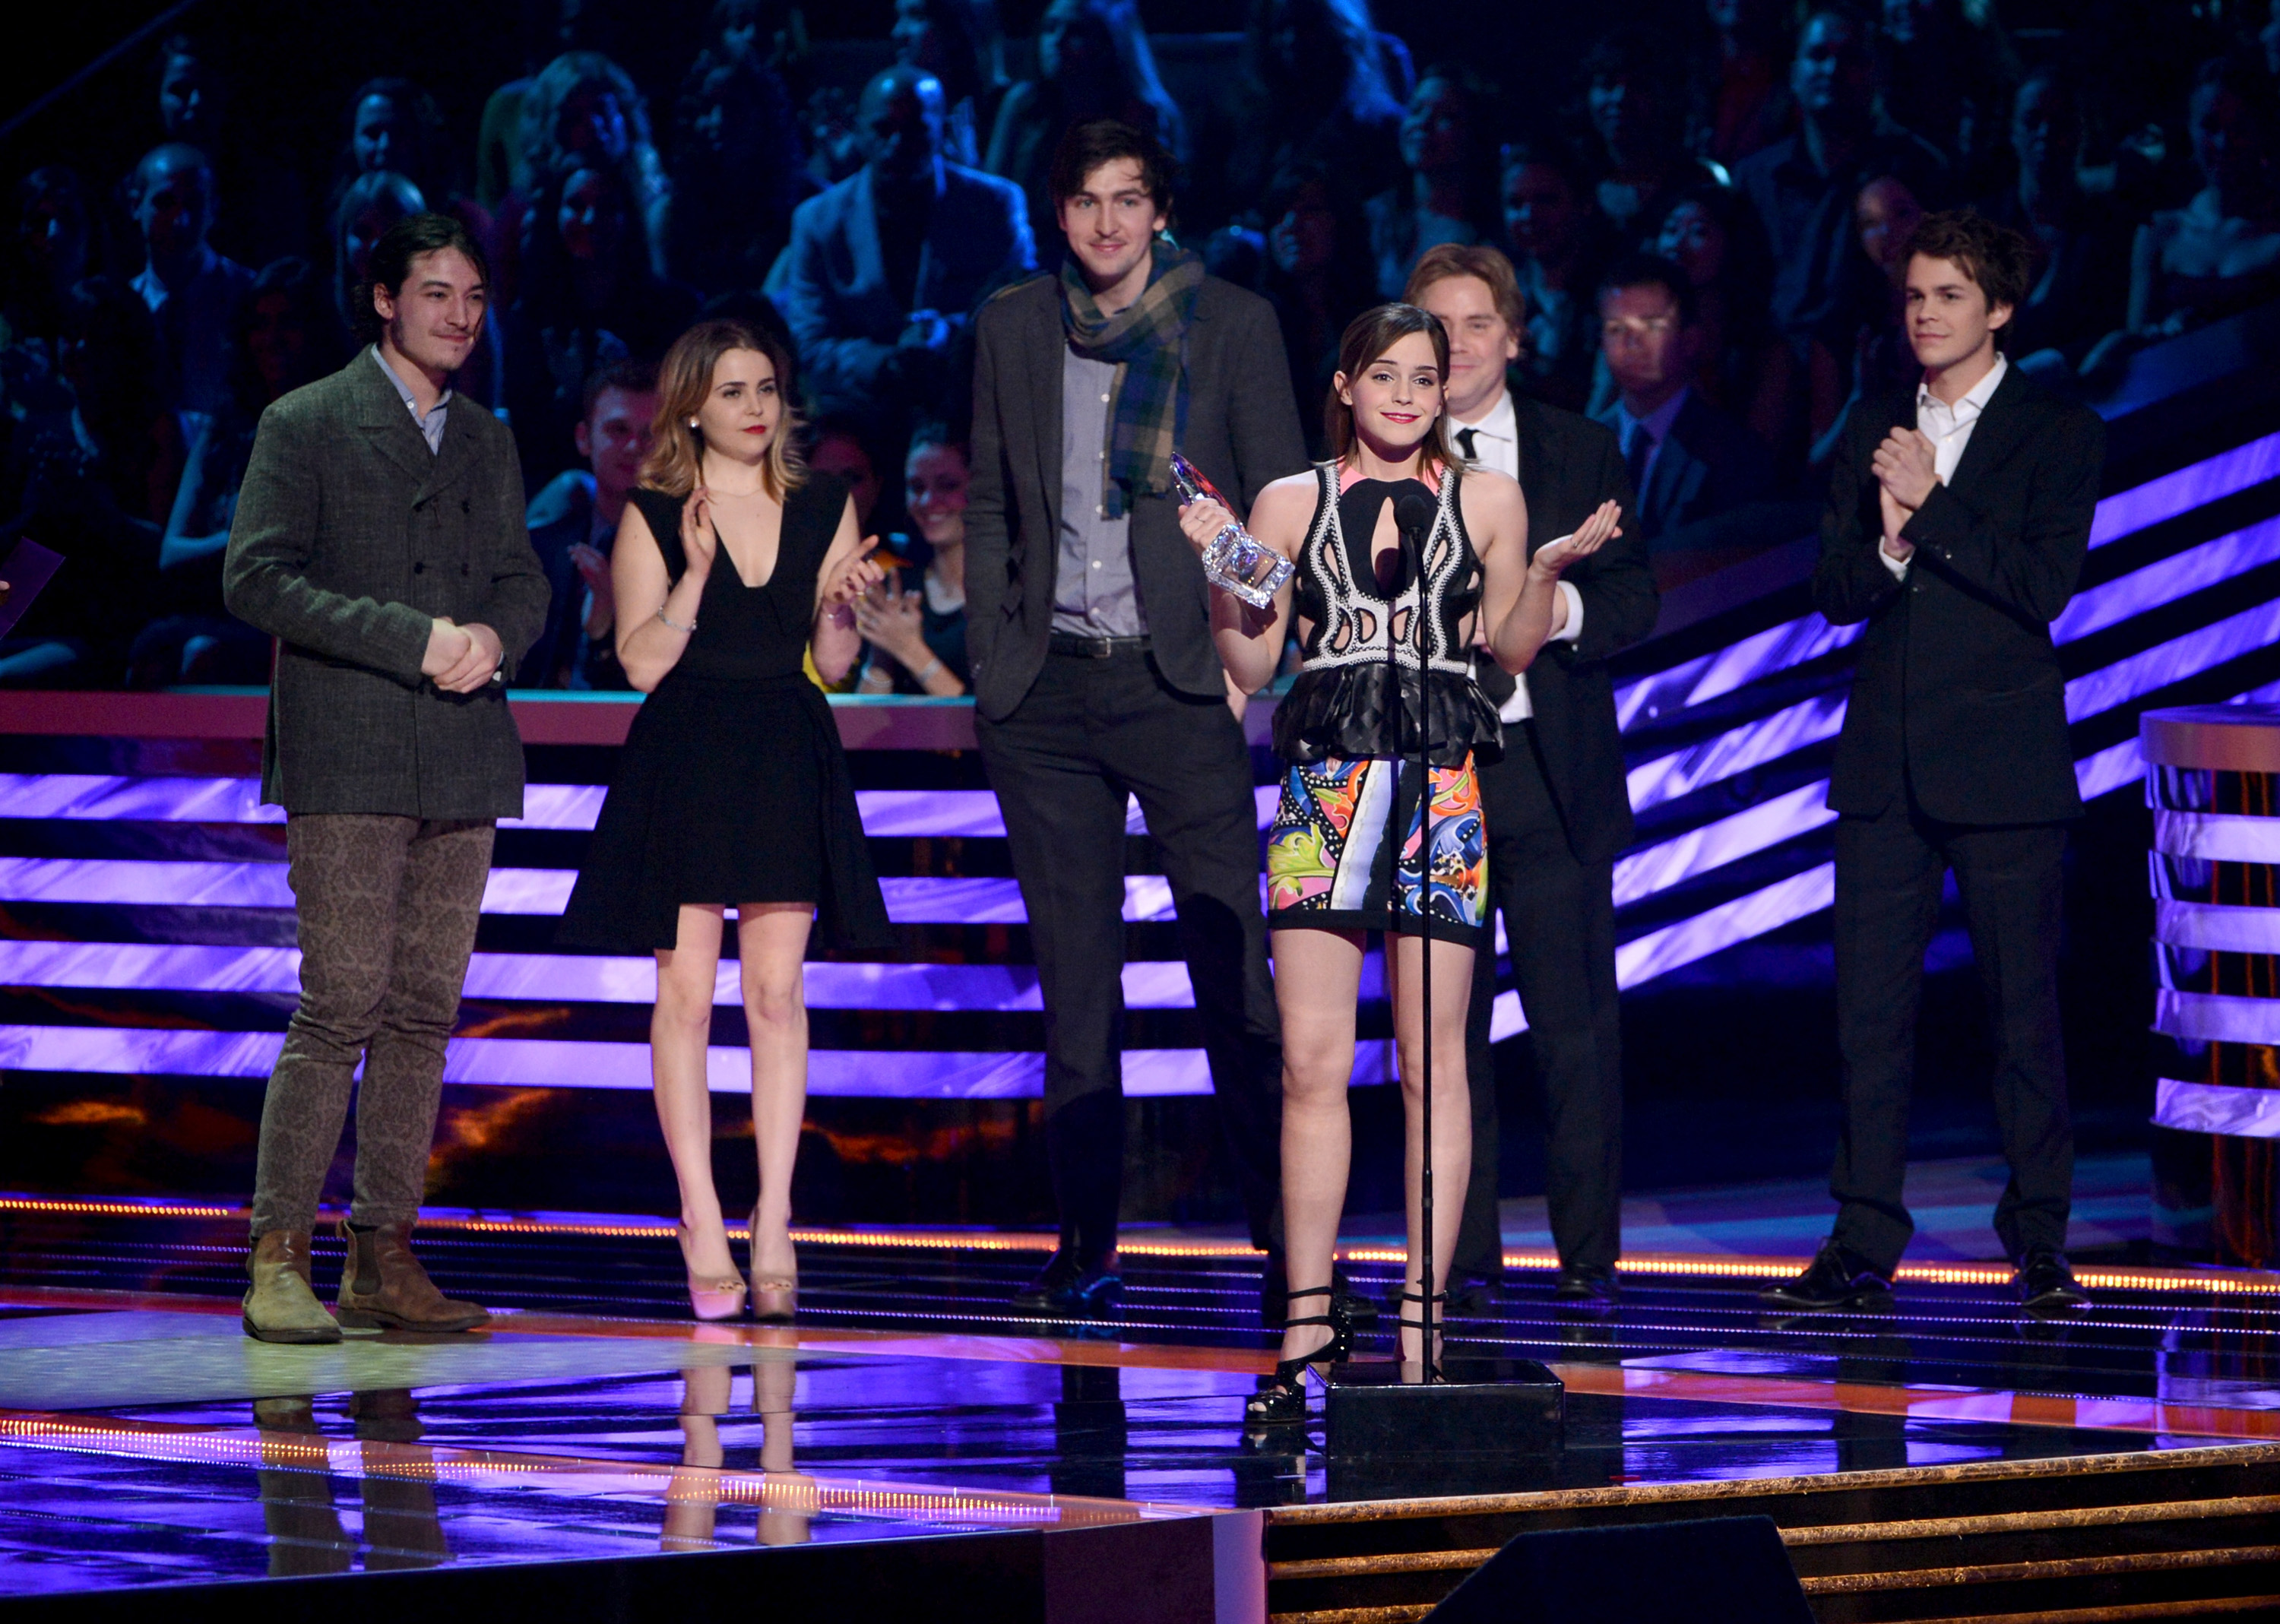 The Perks of Being a Wallflower Cast People's Choice Awards